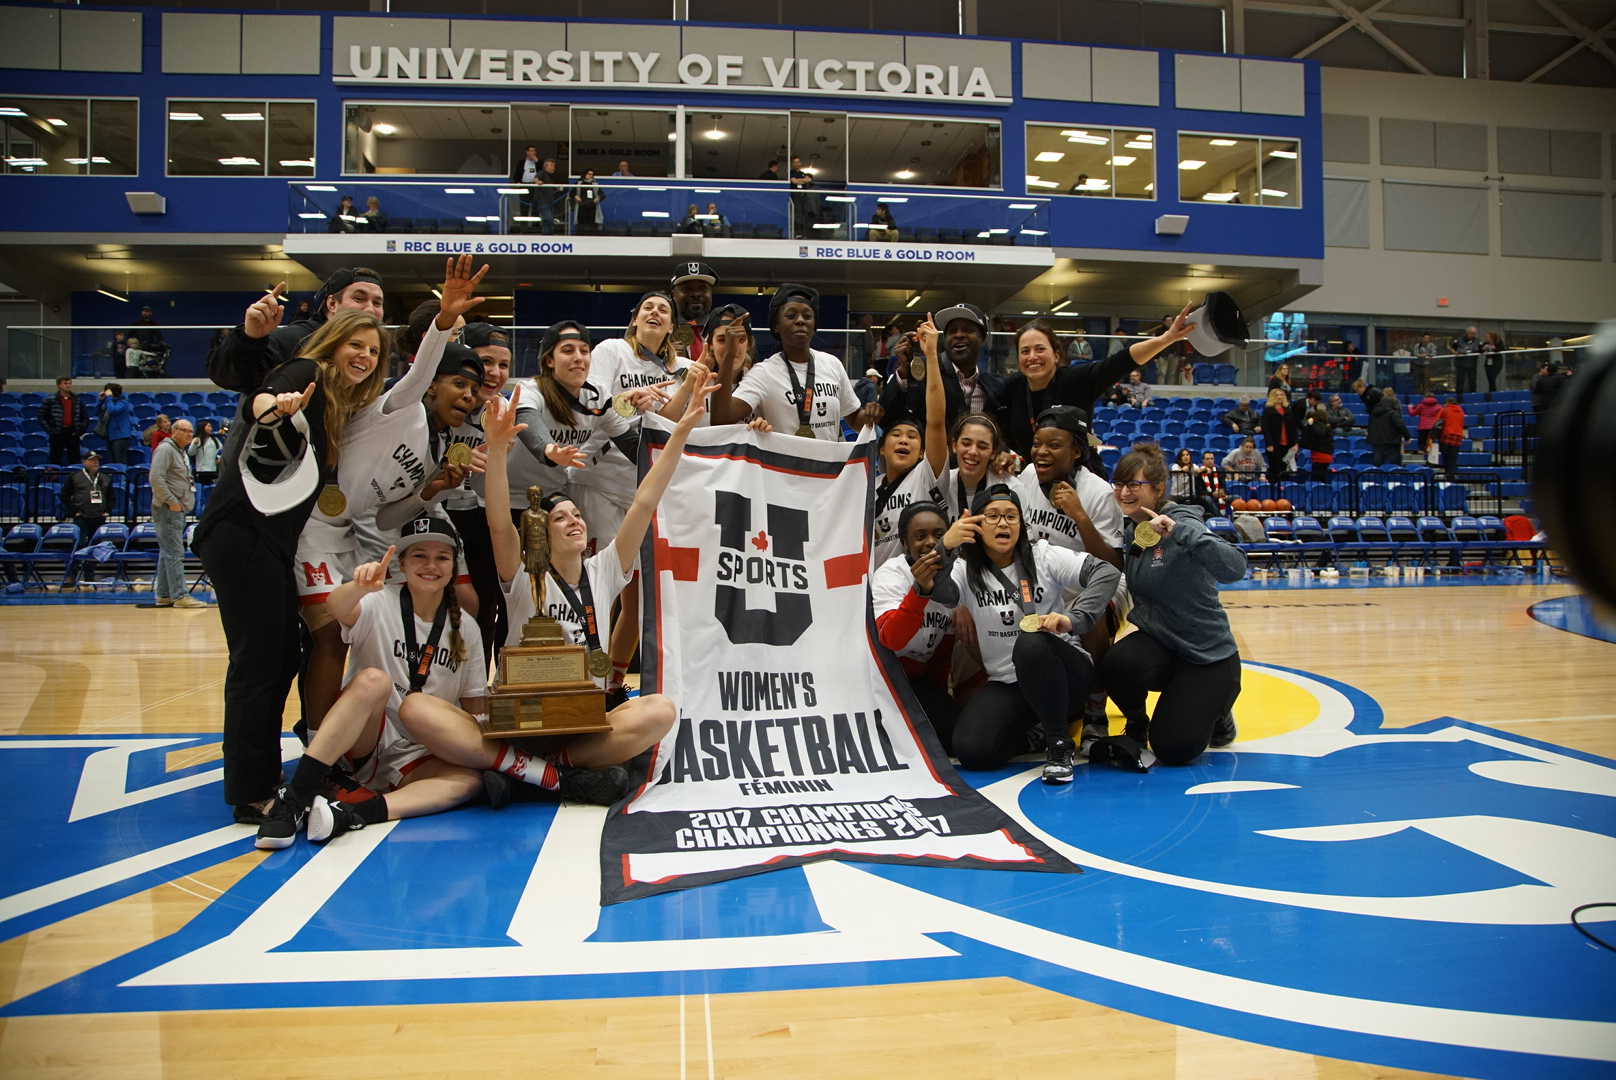 FINAL ArcelorMittal Dofasco U SPORTS women’s basketball championship: McGill pulls away from Laval late to win first women’s basketball national championship in school history